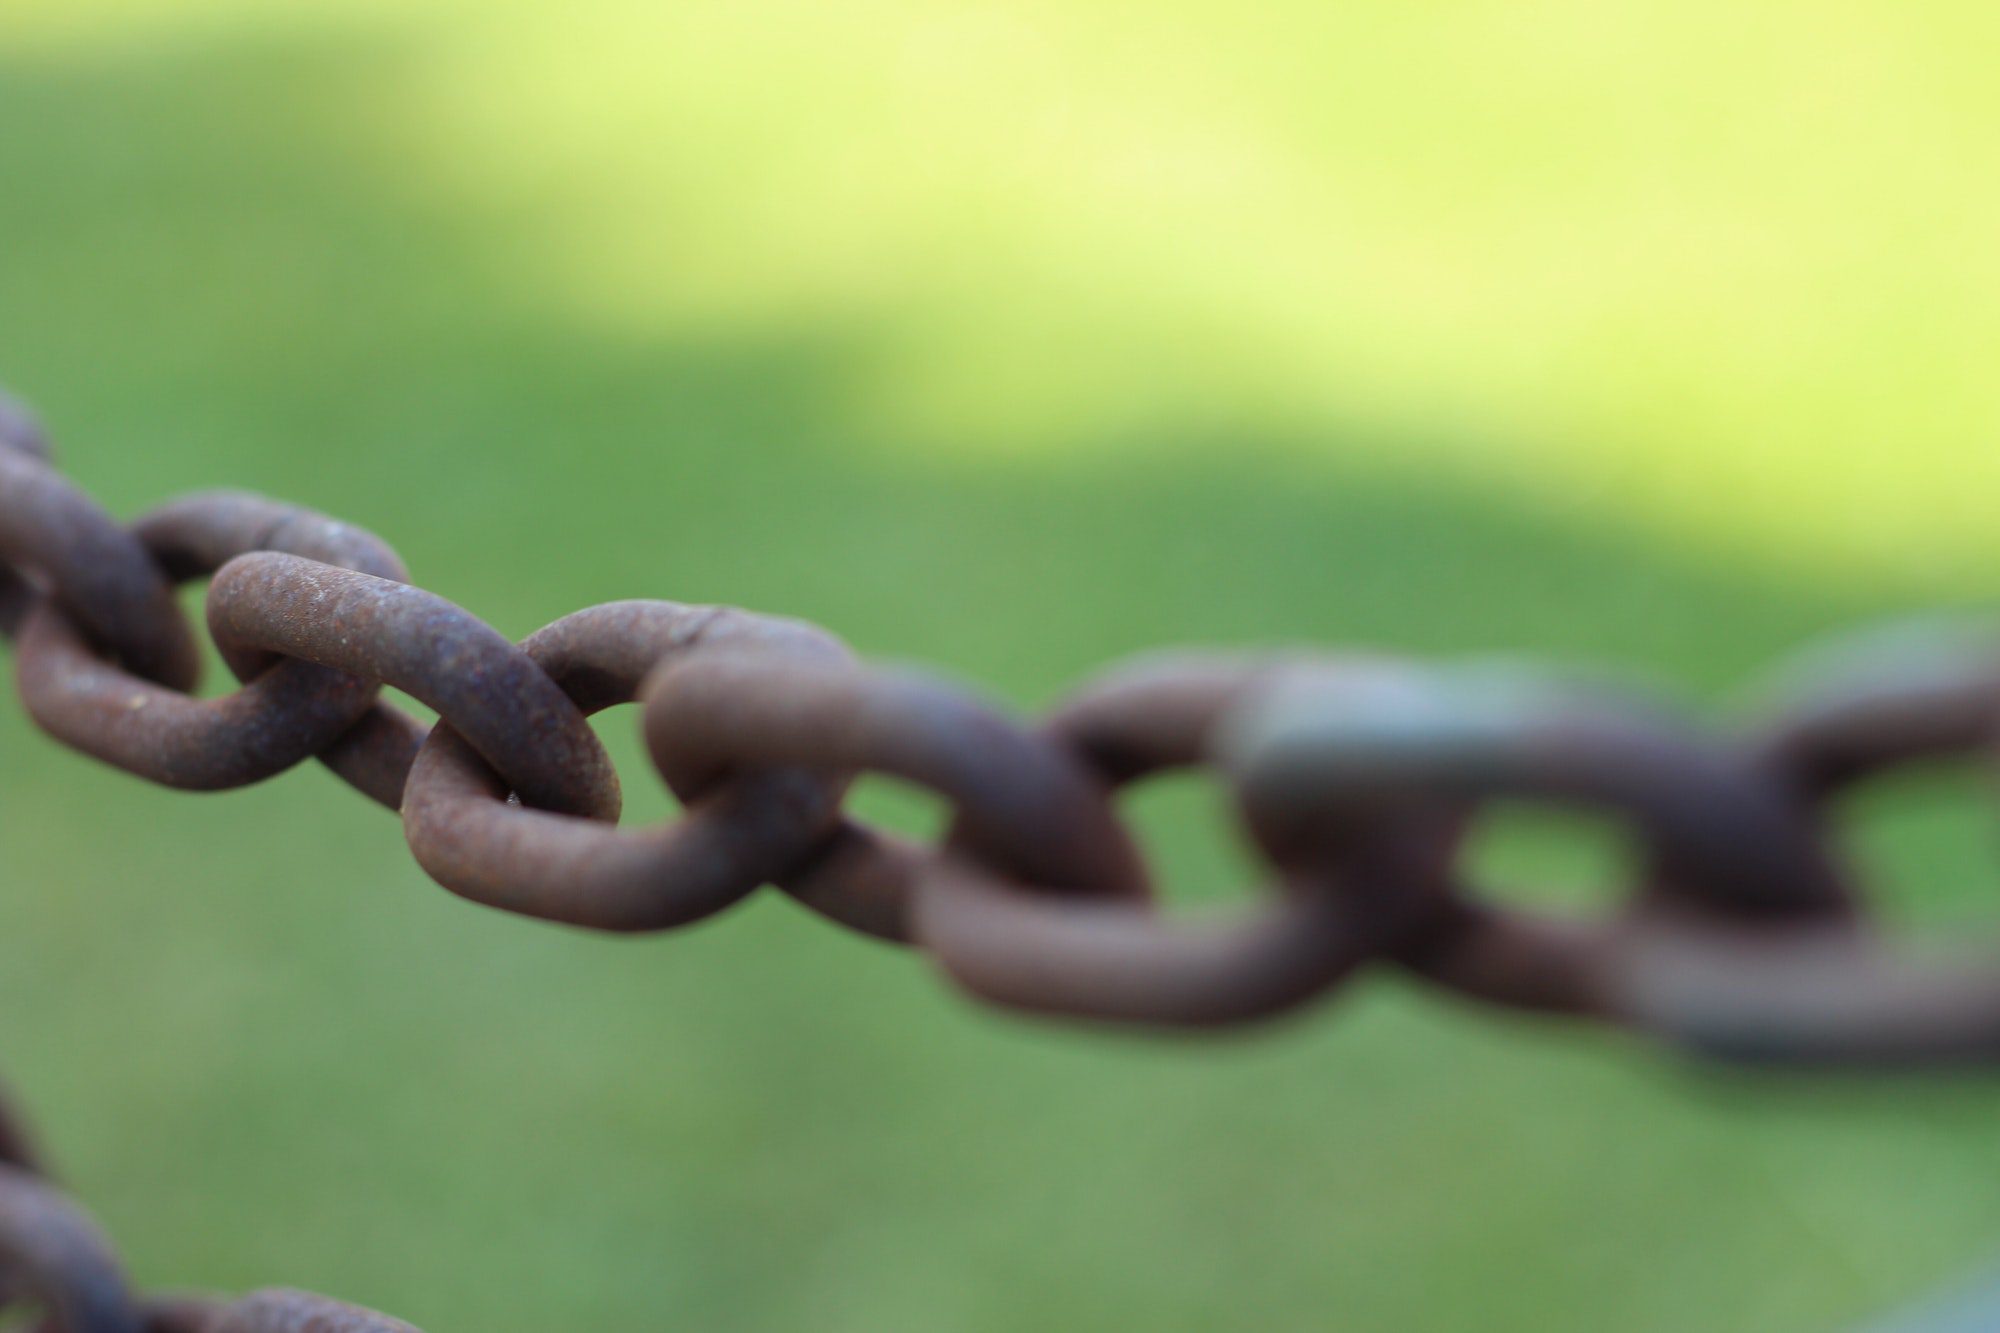 Closeup of a rusted chain Against a green background.